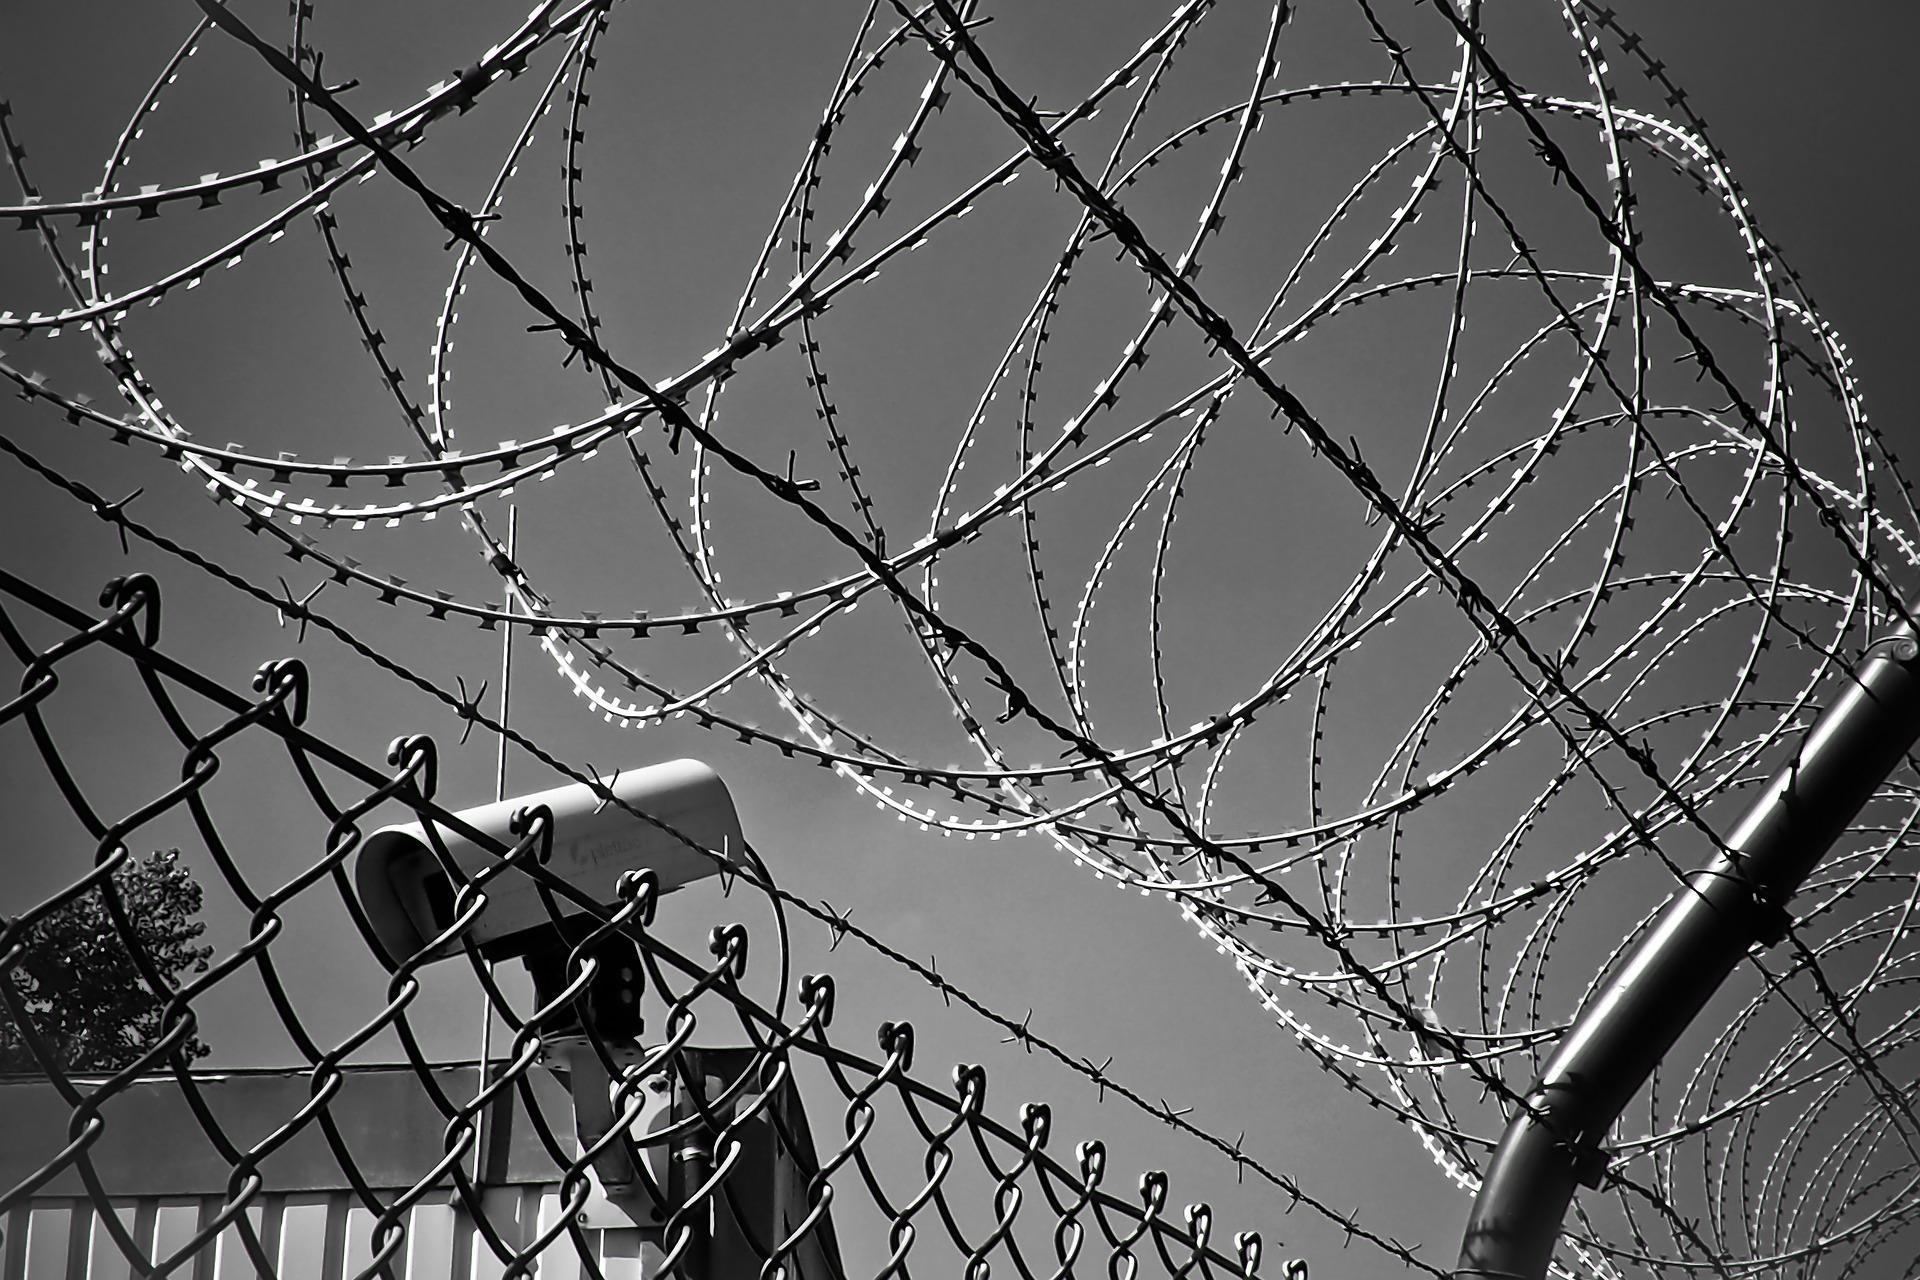 image of barbed wire fence